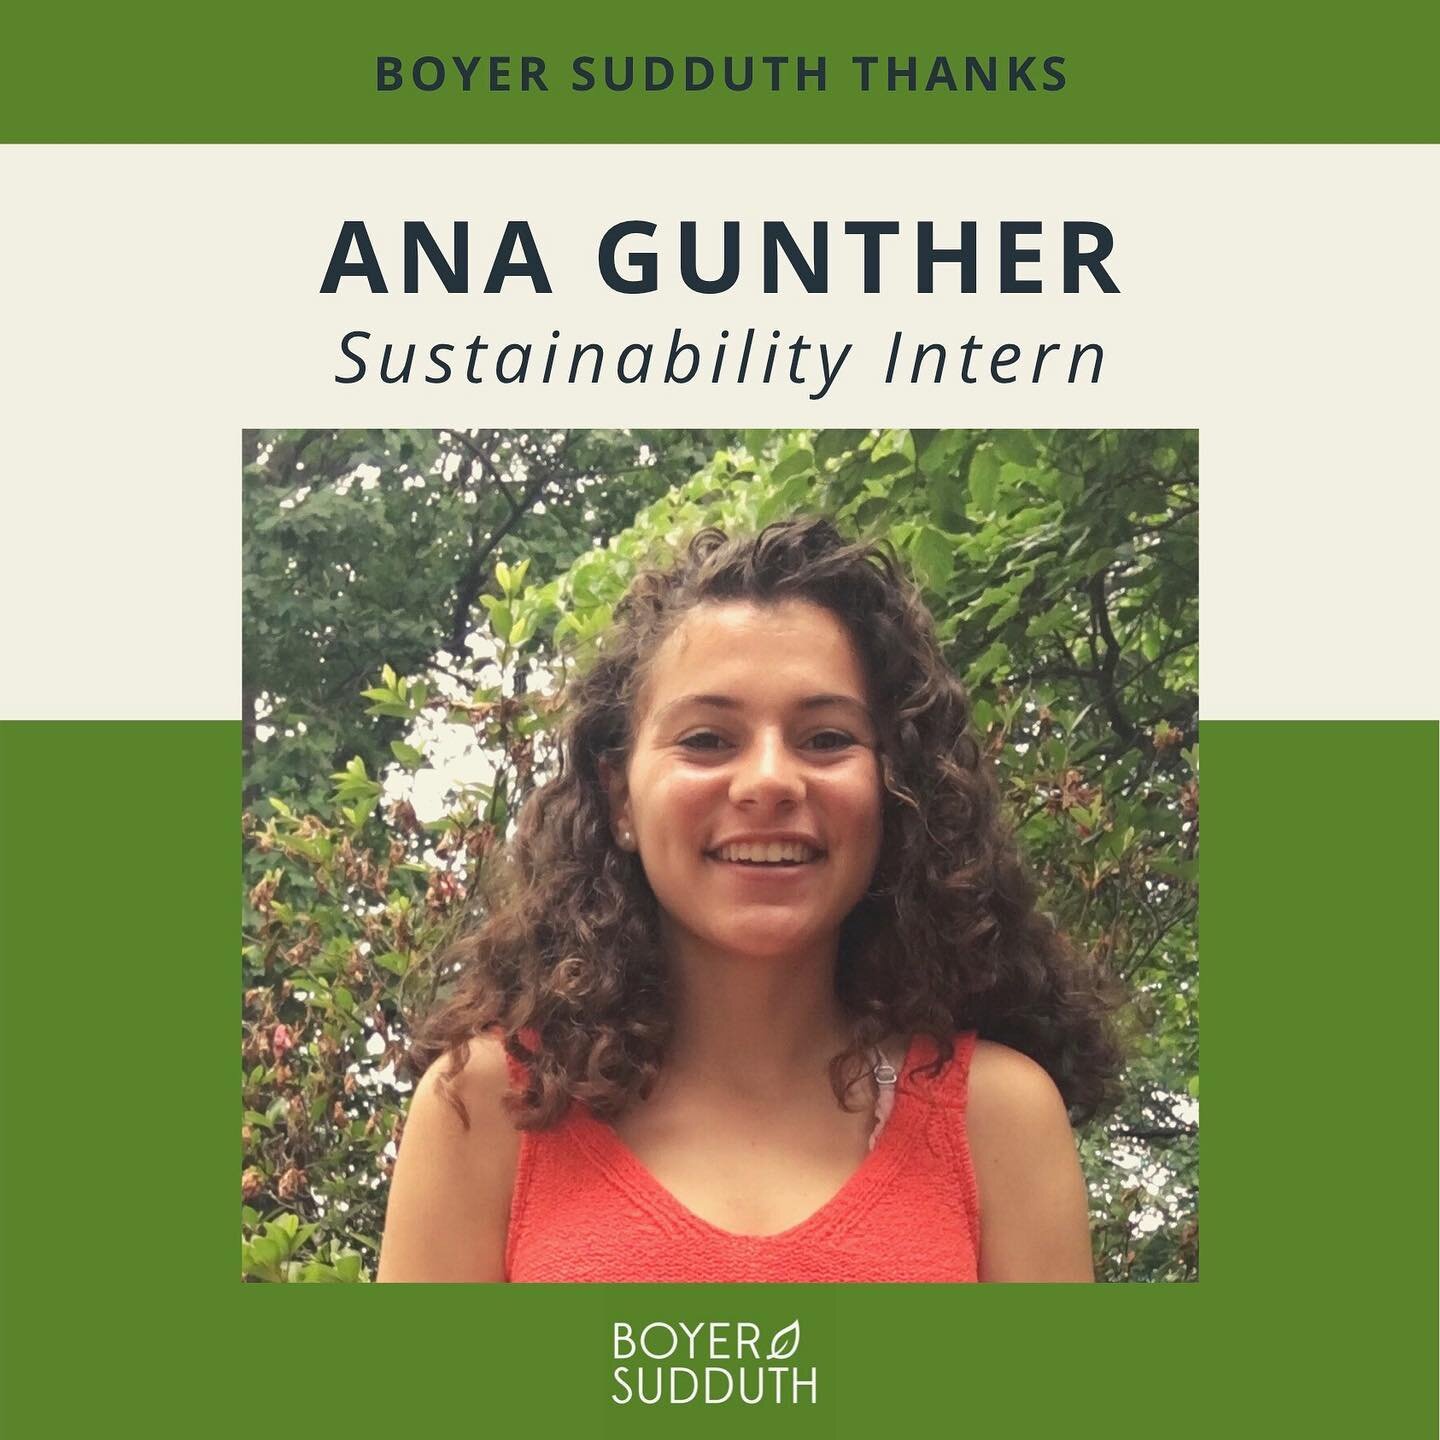 Today, we say goodbye and thank Ana Gunther for your committed contributions this fall and winter to Boyer Sudduth. 

You were an incredible member of our team and we are sending you best wishes as you continue your sophomore year at Boden! We will m